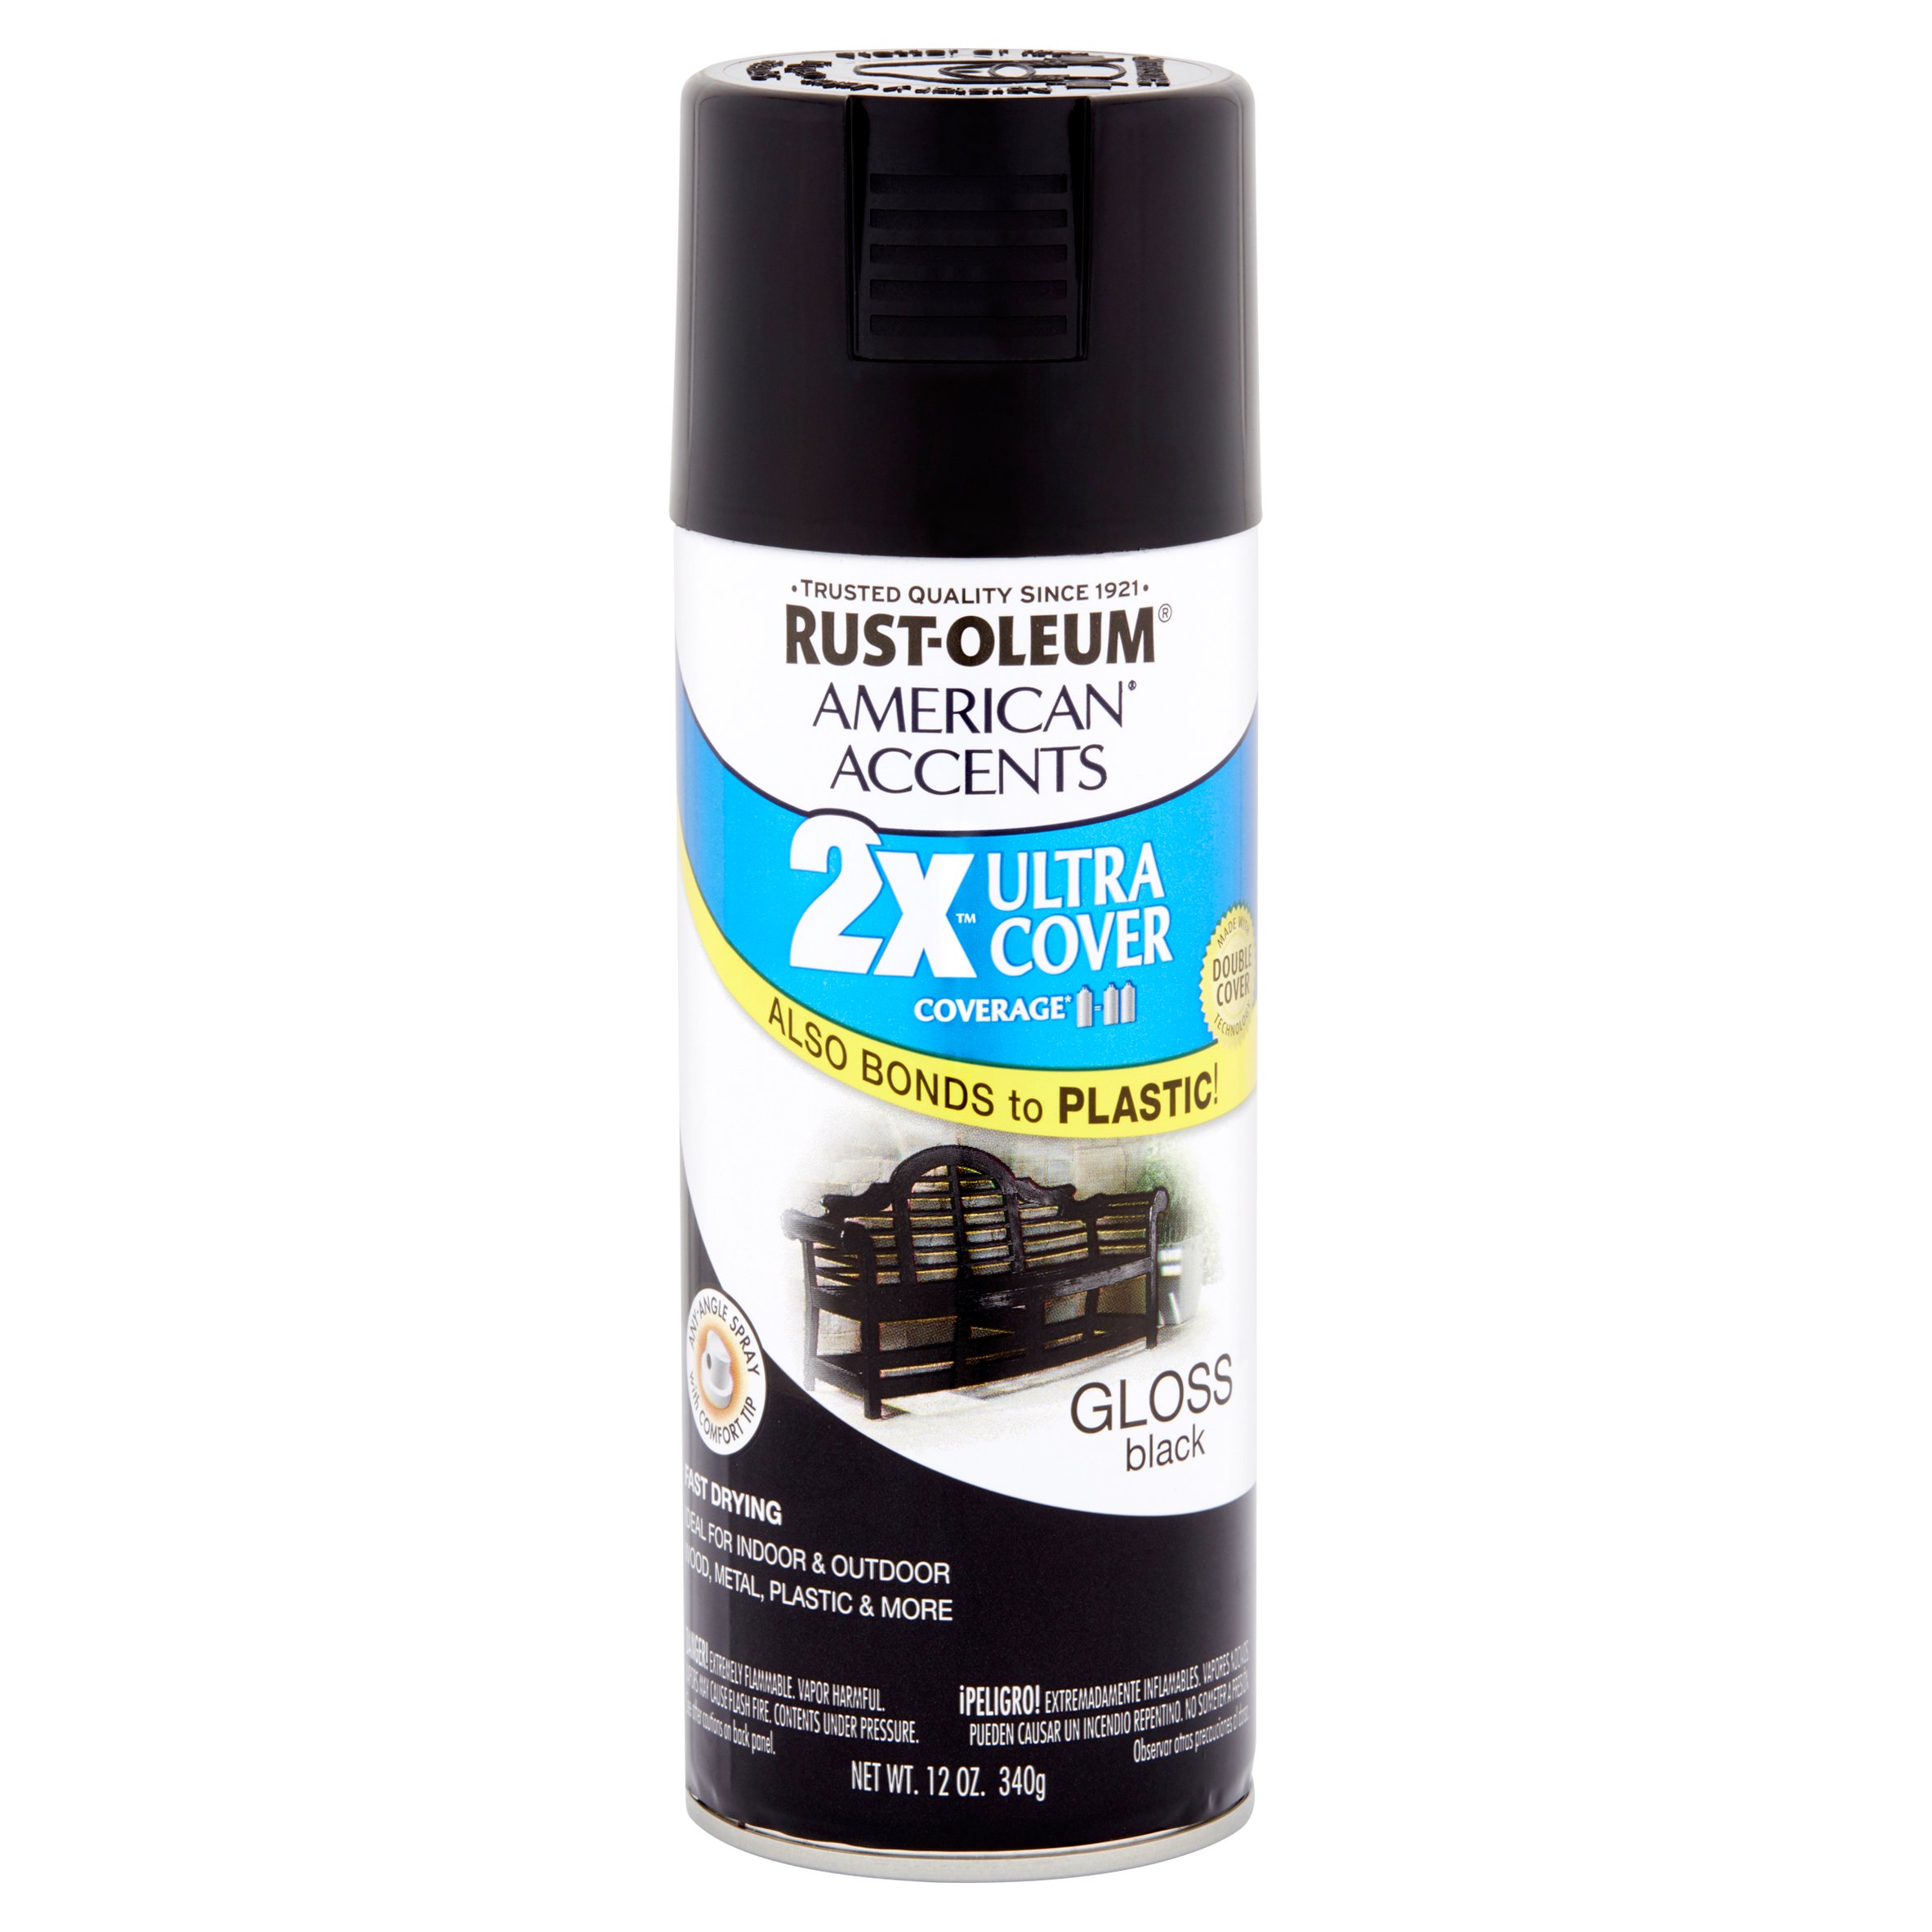 Rust-Oleum American Accents Ultra Cover 2X Gloss Black Spray Paint and Primer in 1, 12 oz - image 1 of 5